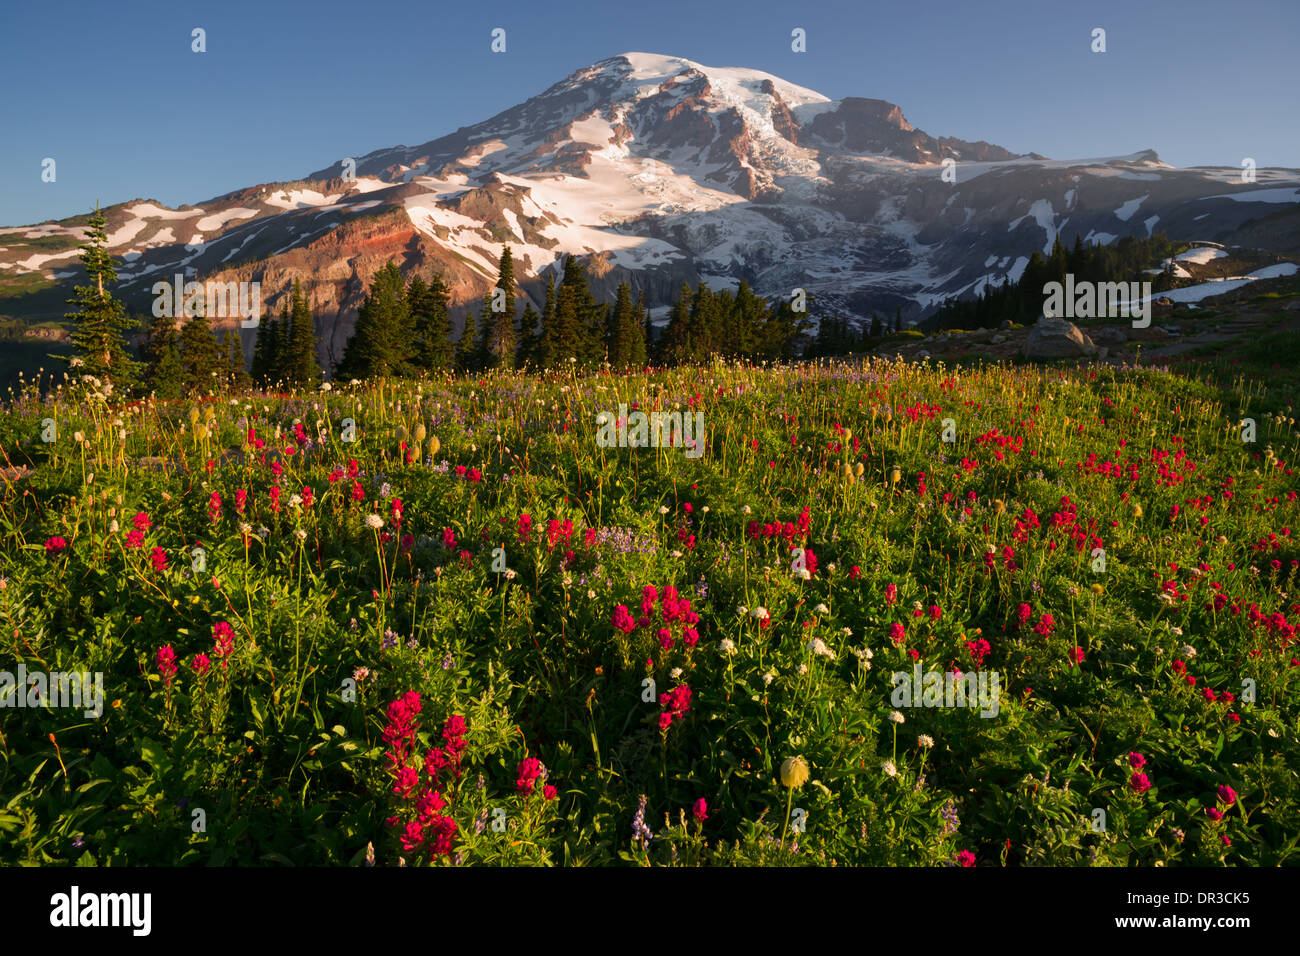 A dramatica and colorful view of Mt. Rainier with wildflowers in full bloom Stock Photo